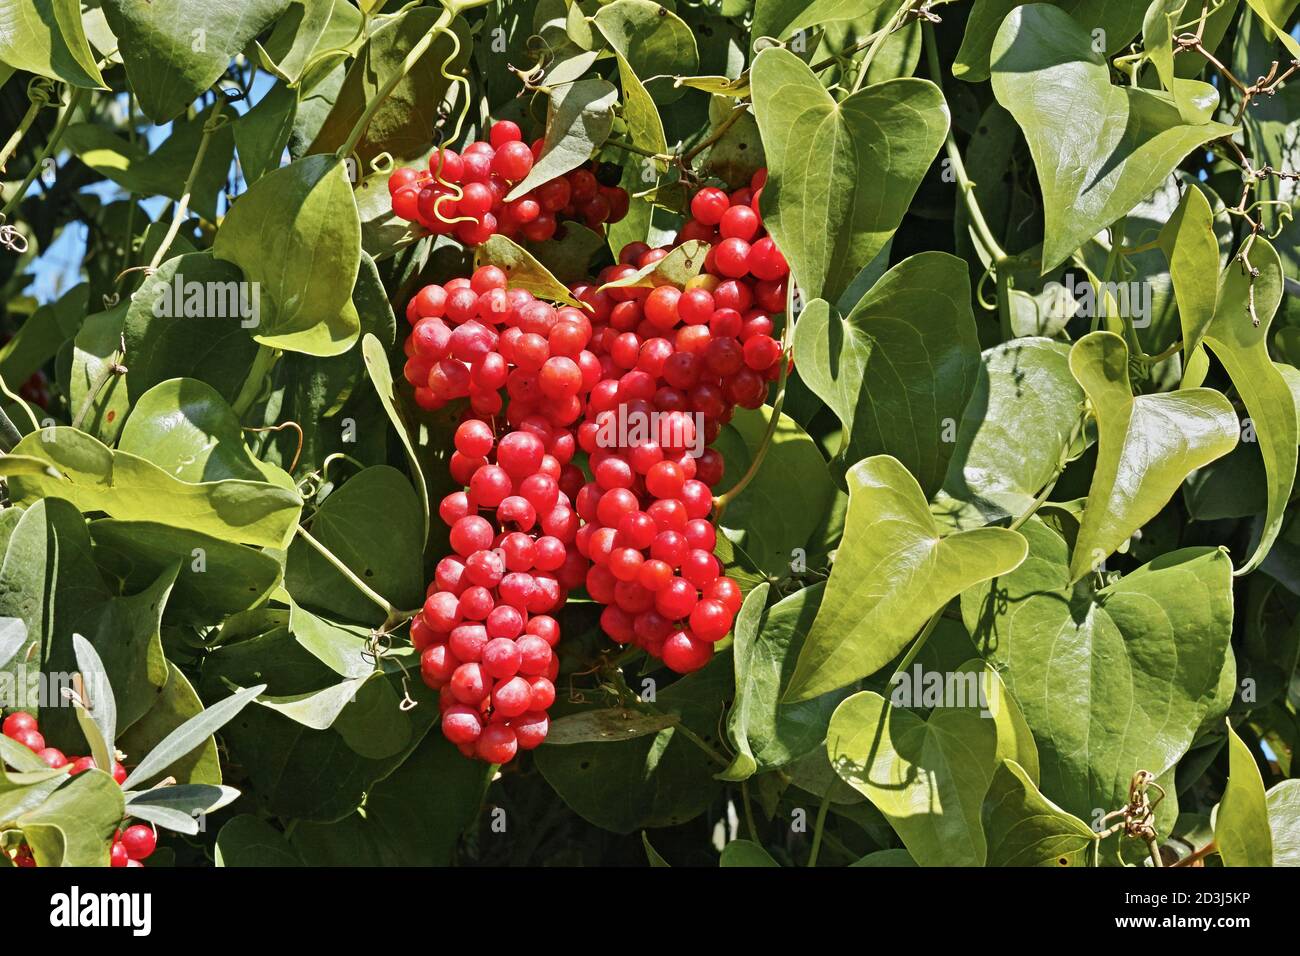 detail of the leaves and clusters of fruits of sarsaparilla, Smilax aspera Stock Photo